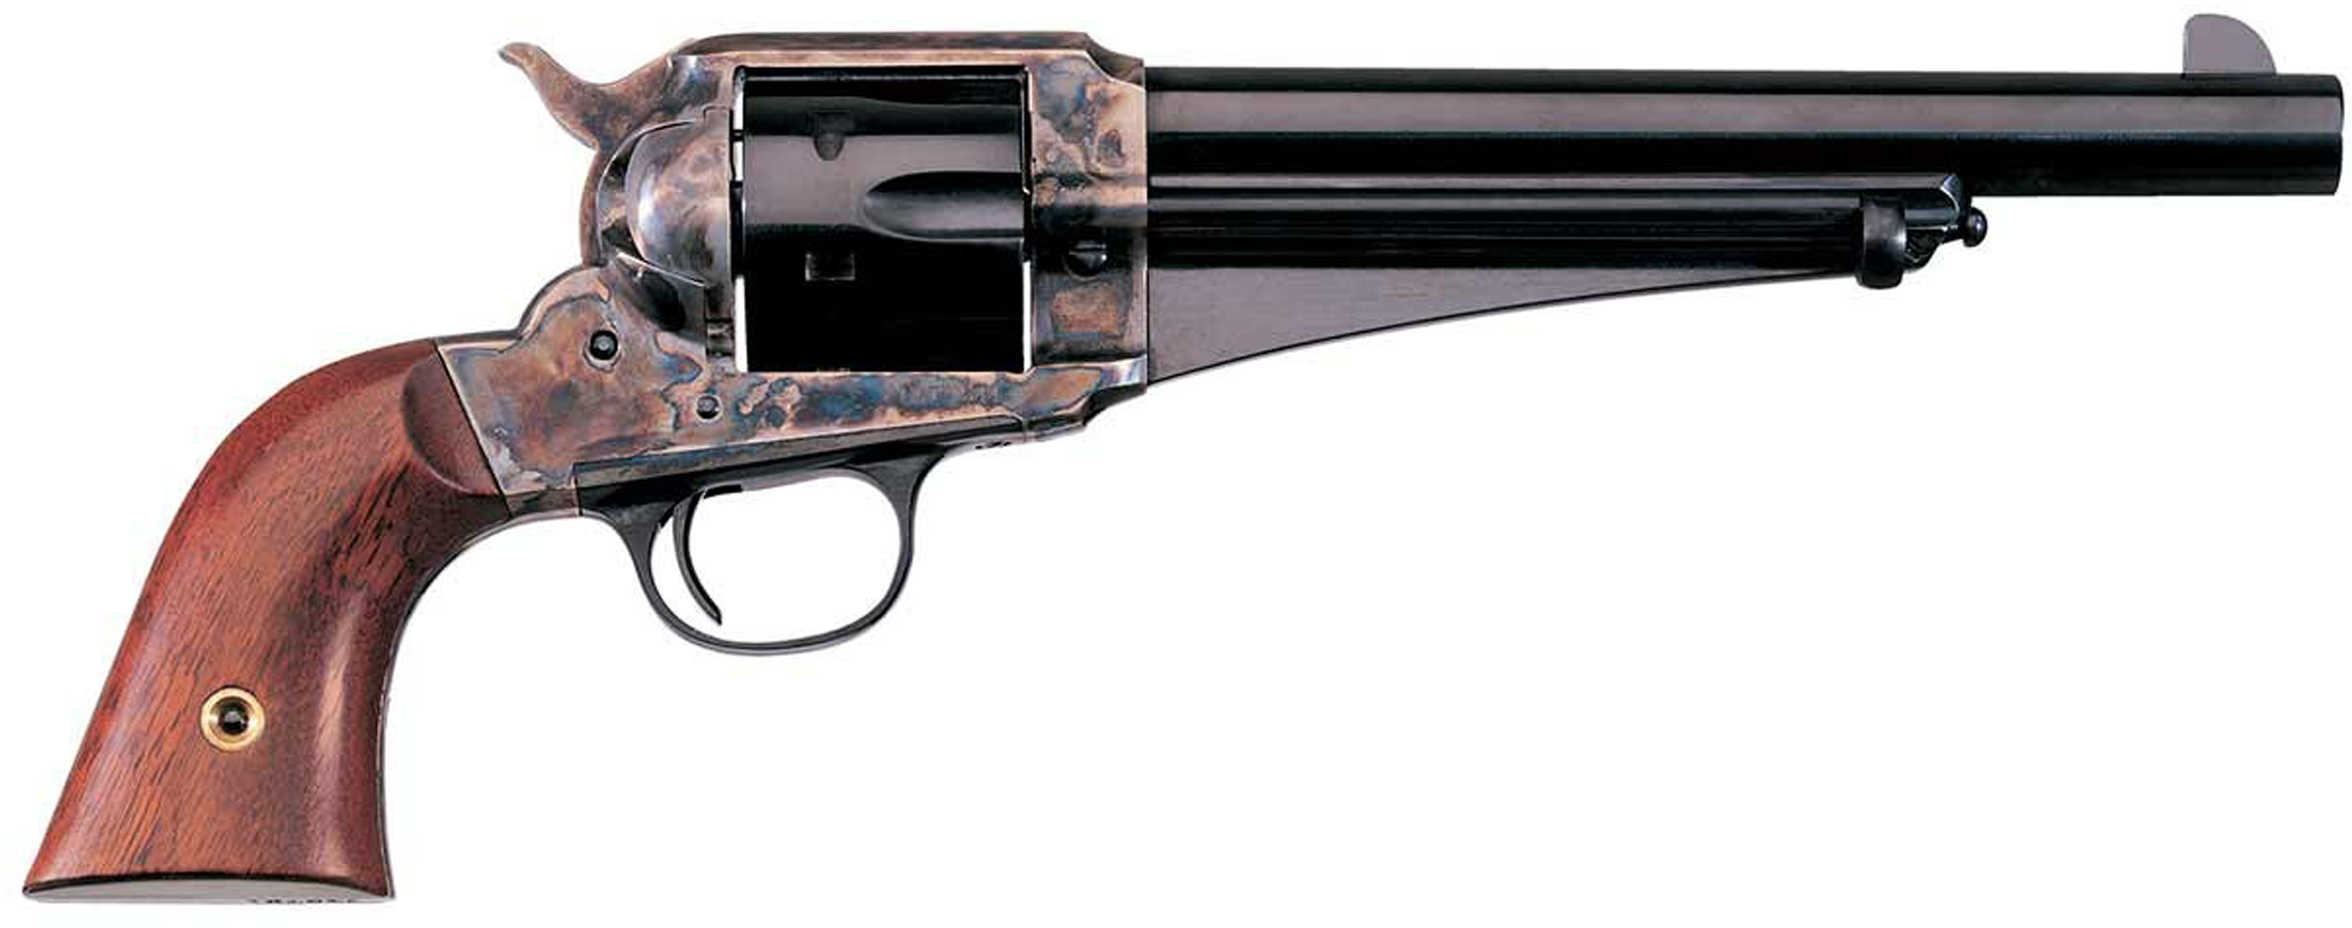 Taylor's & Company 1875 Army Outlaw 45 Colt 7.5" Barrel 6 Round Walnut Grip Blued With Case Hardened Frame Revolver 0151